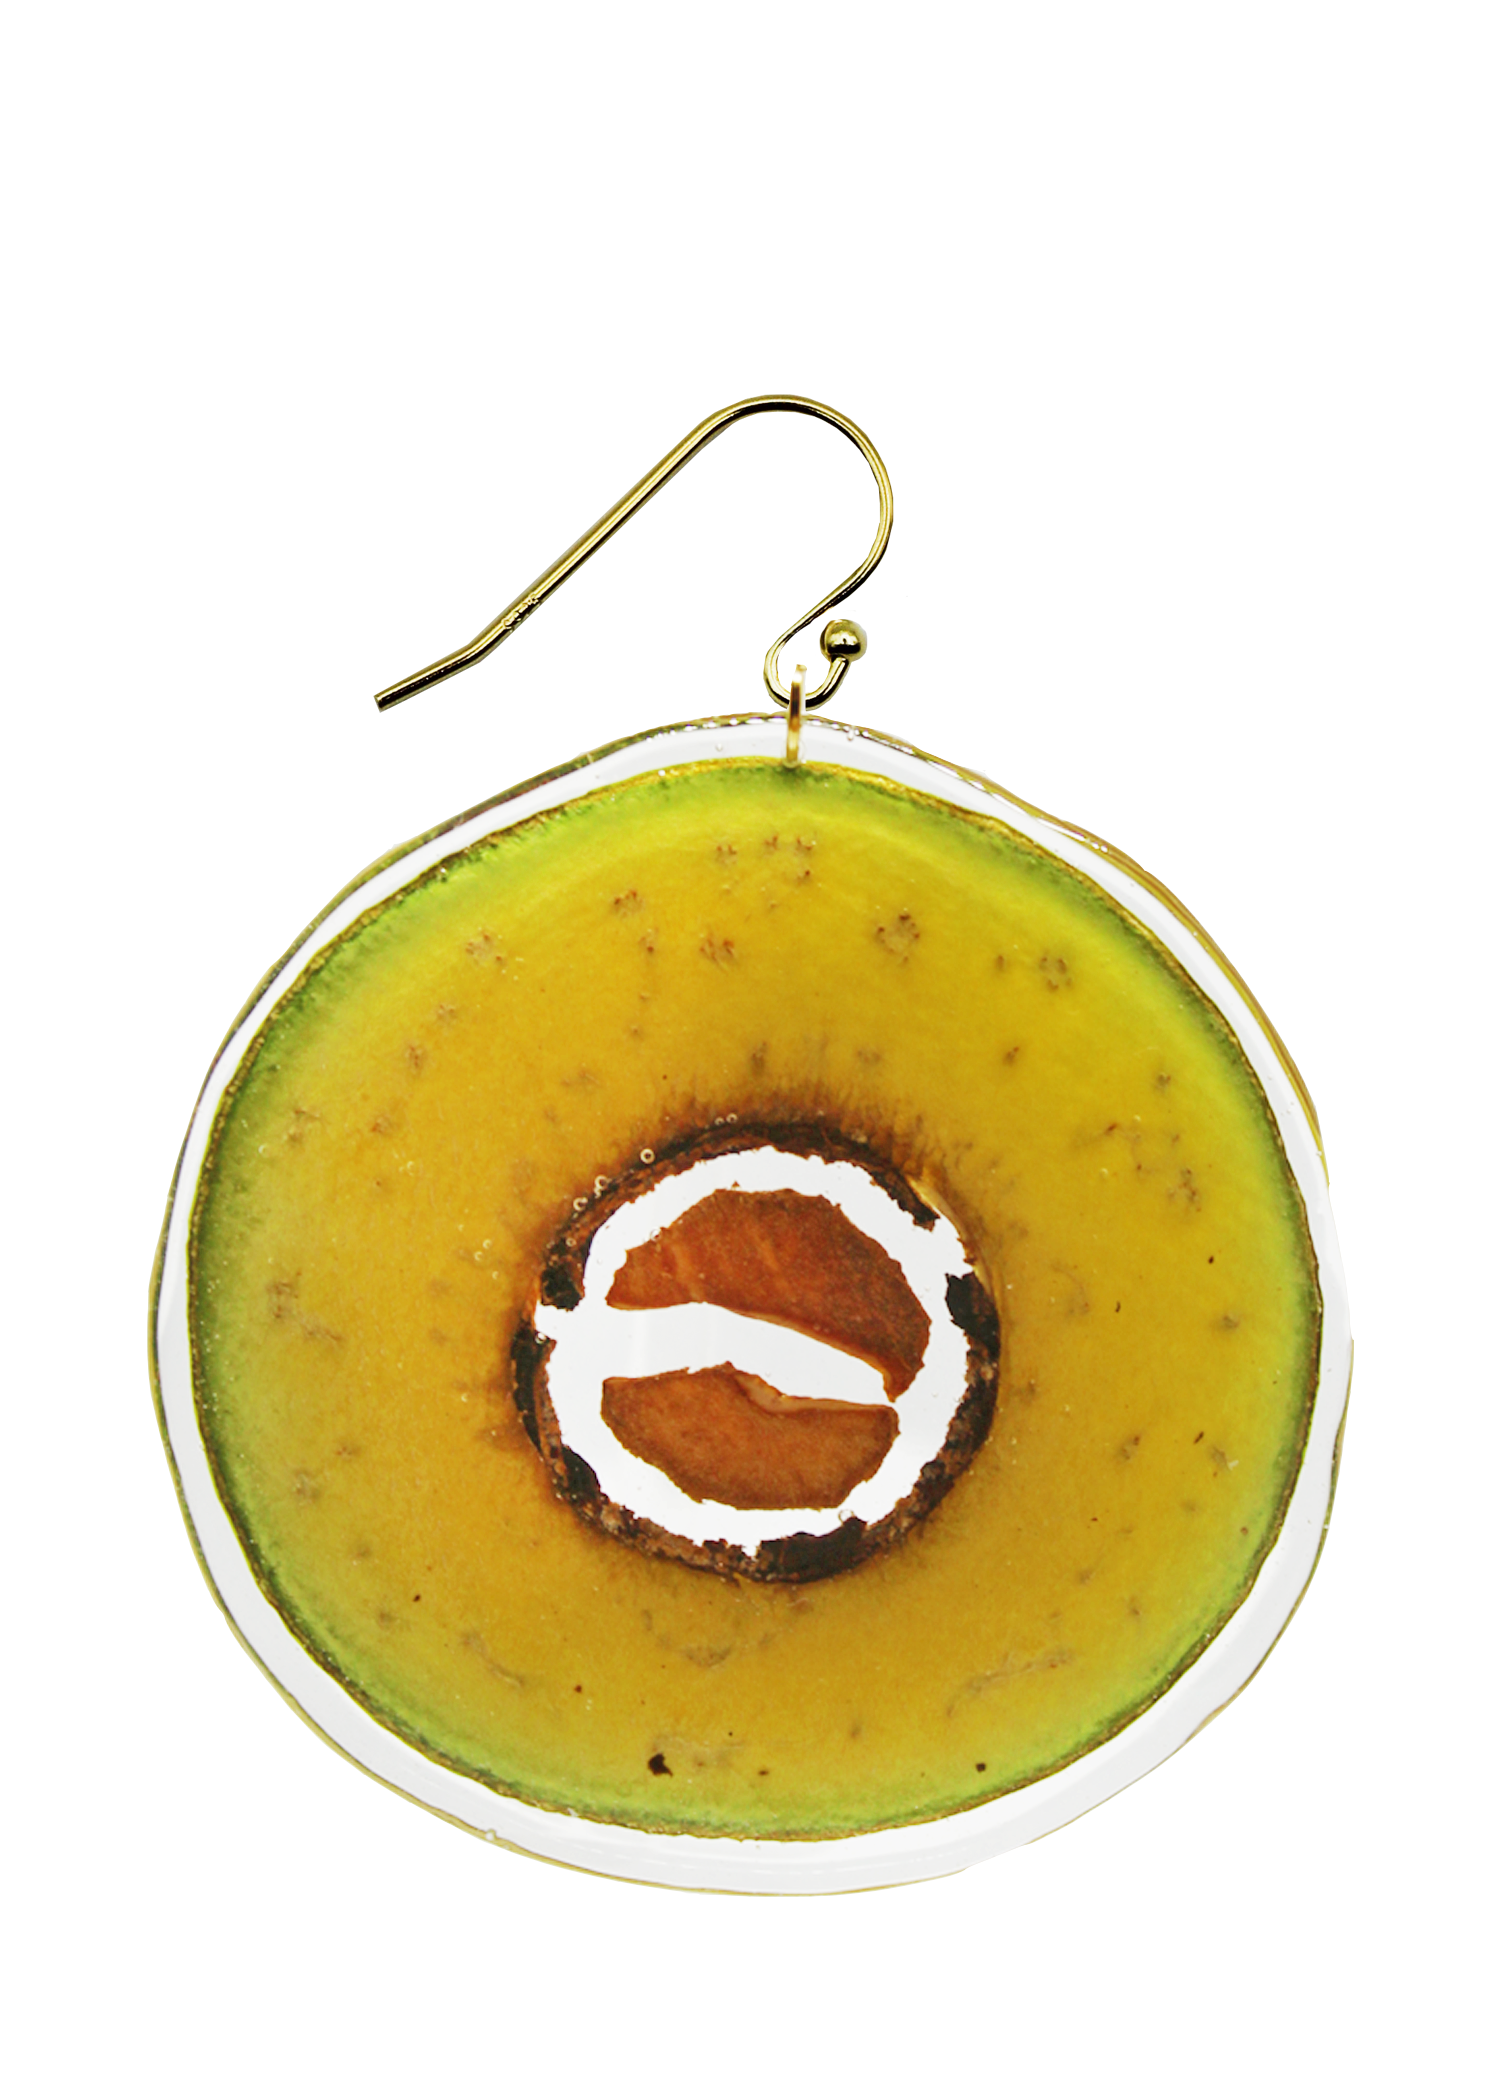 Resin Coated Circular Slice of Avocado with Partial Pit on a French Hook Earring